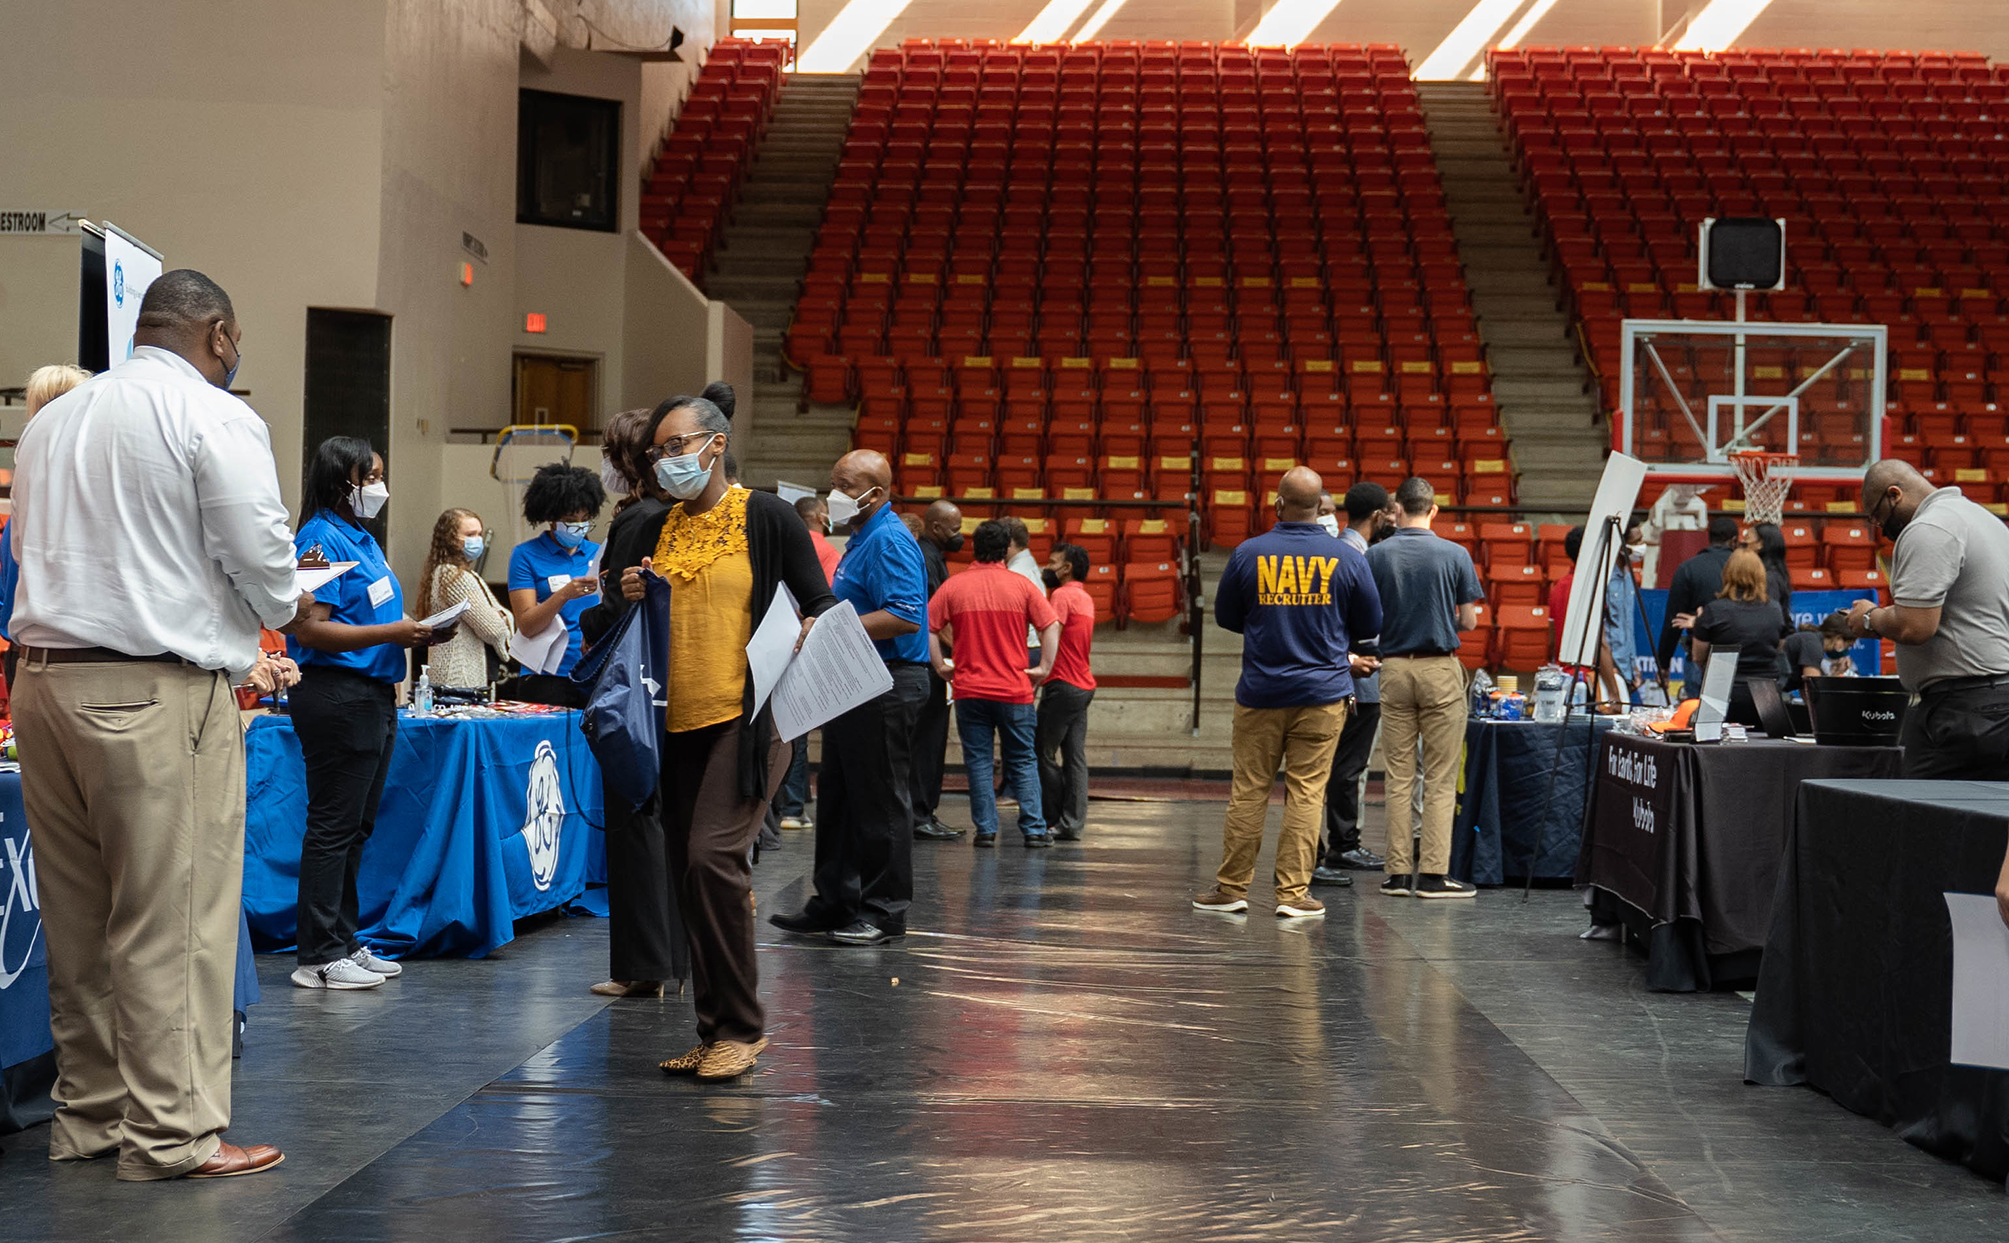 Students attending a career fair inside the arena